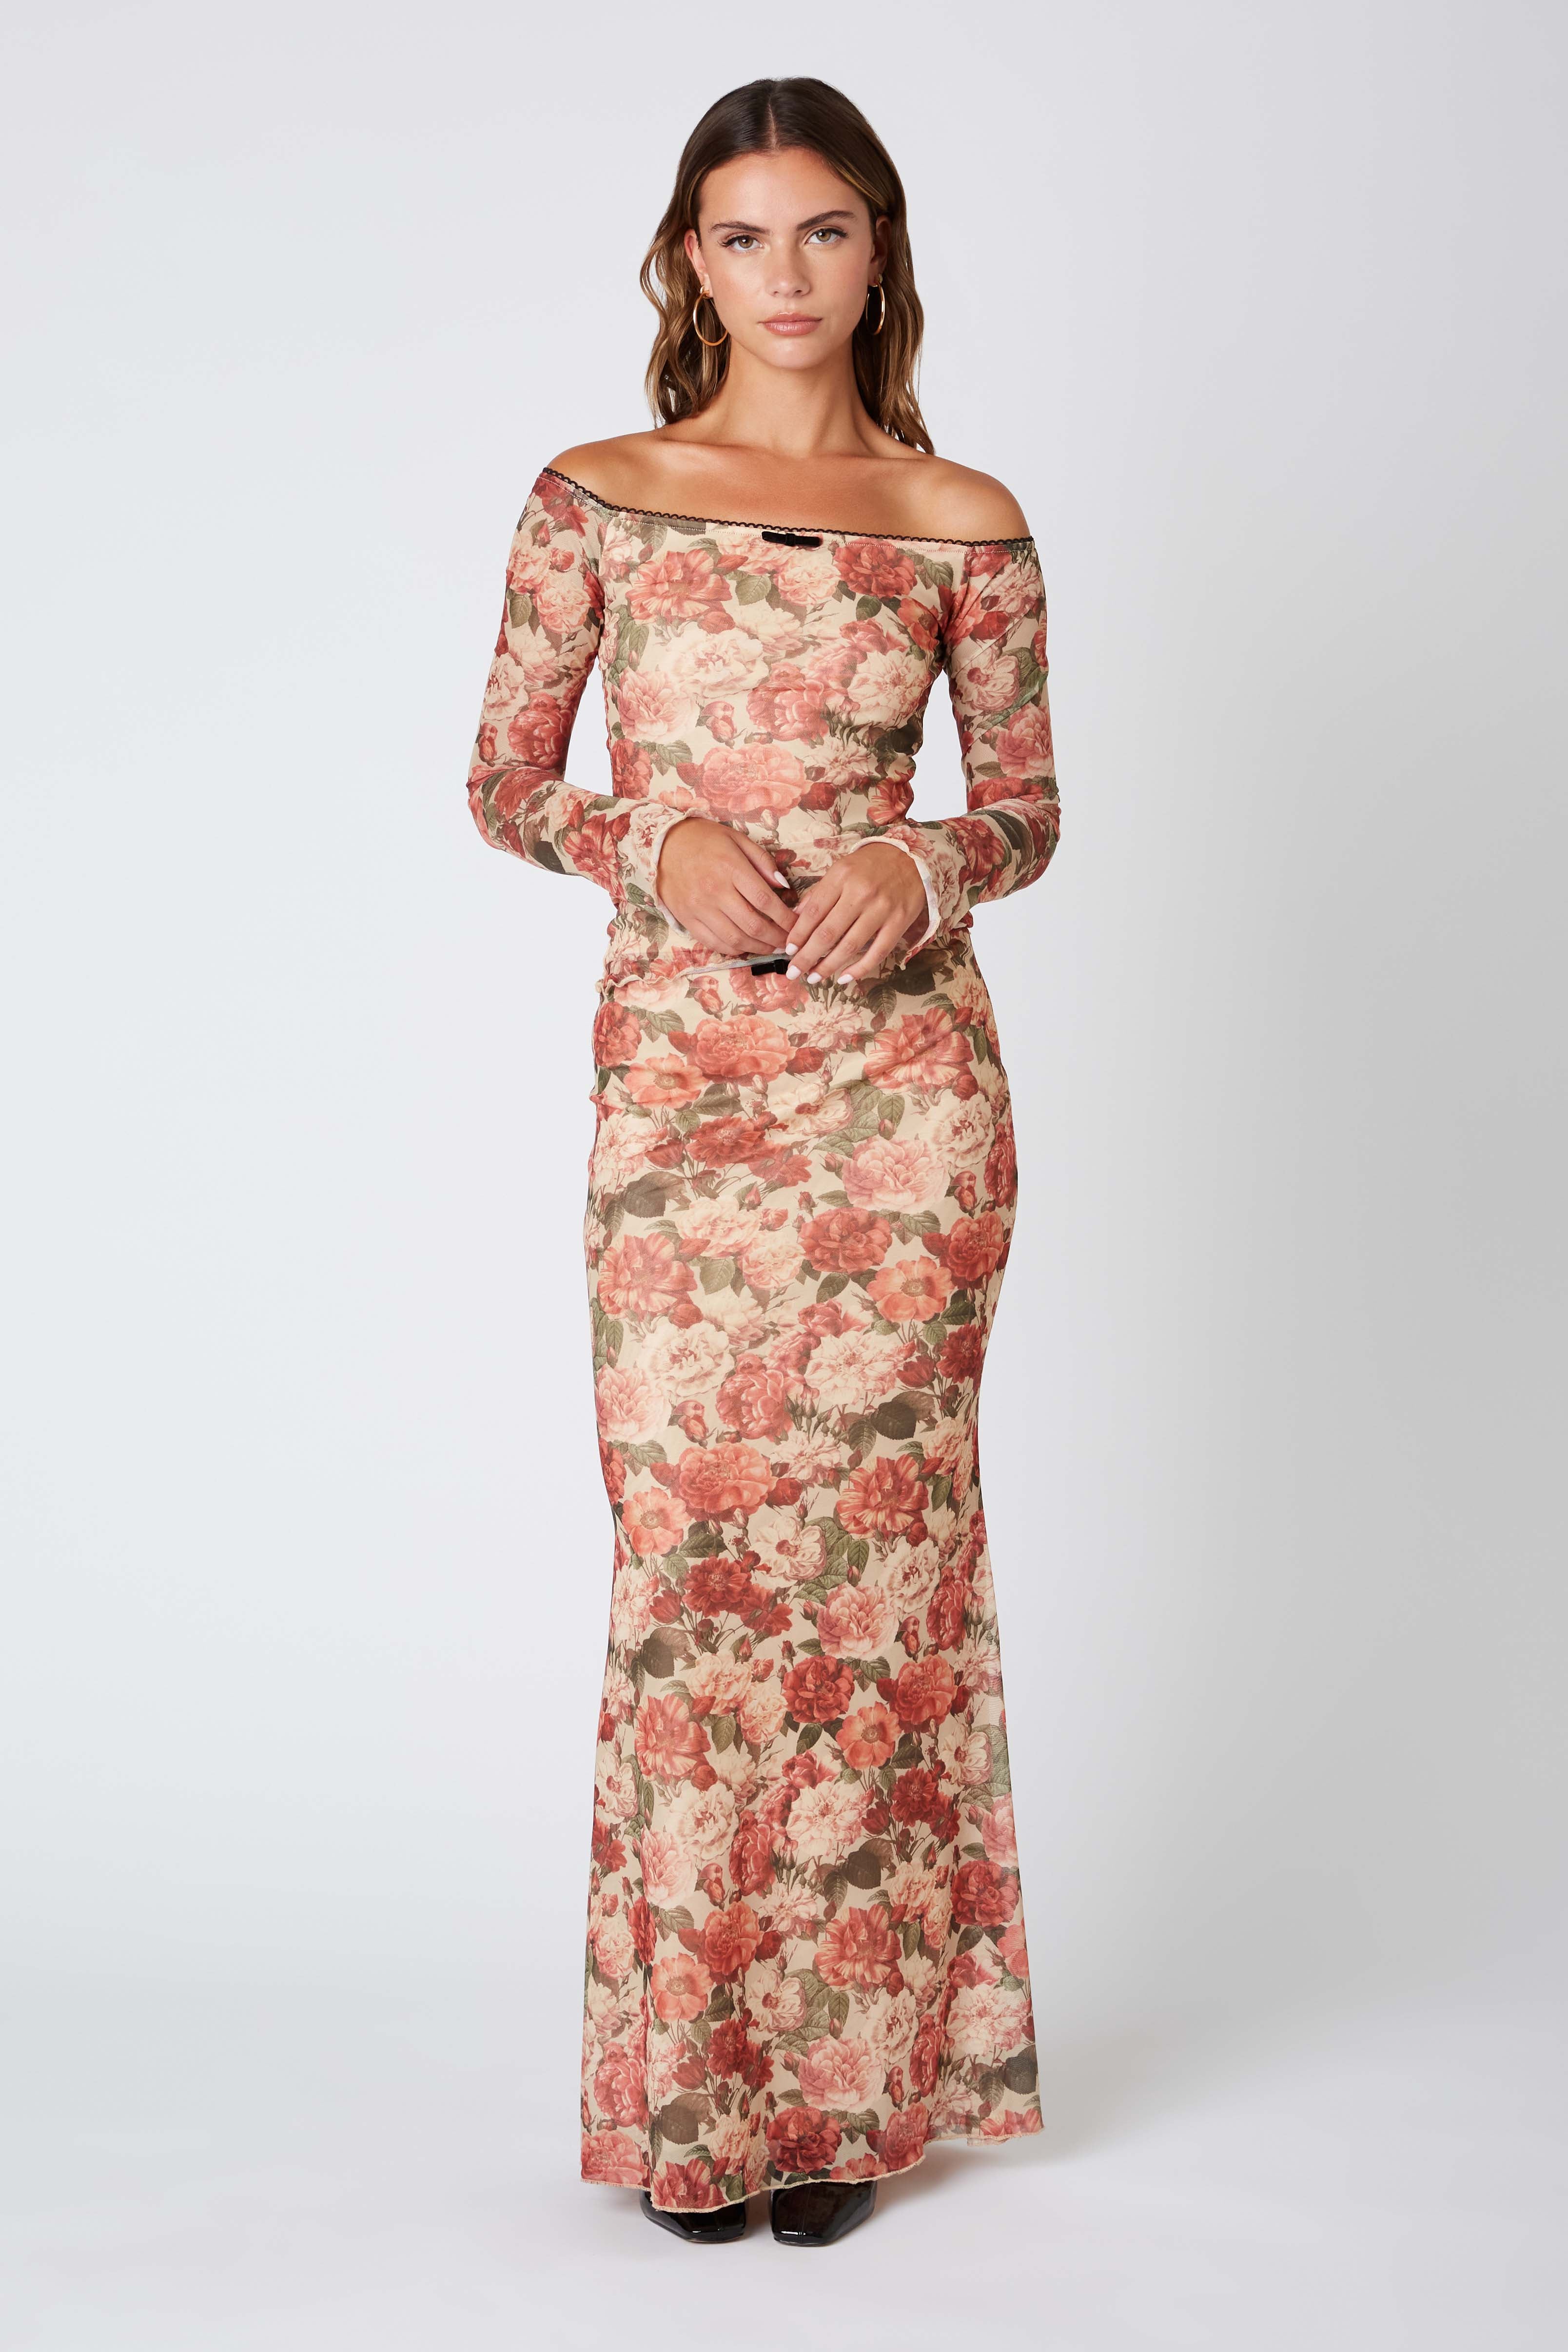 Floral Micro Mesh Maxi Skirt in Amber Front View